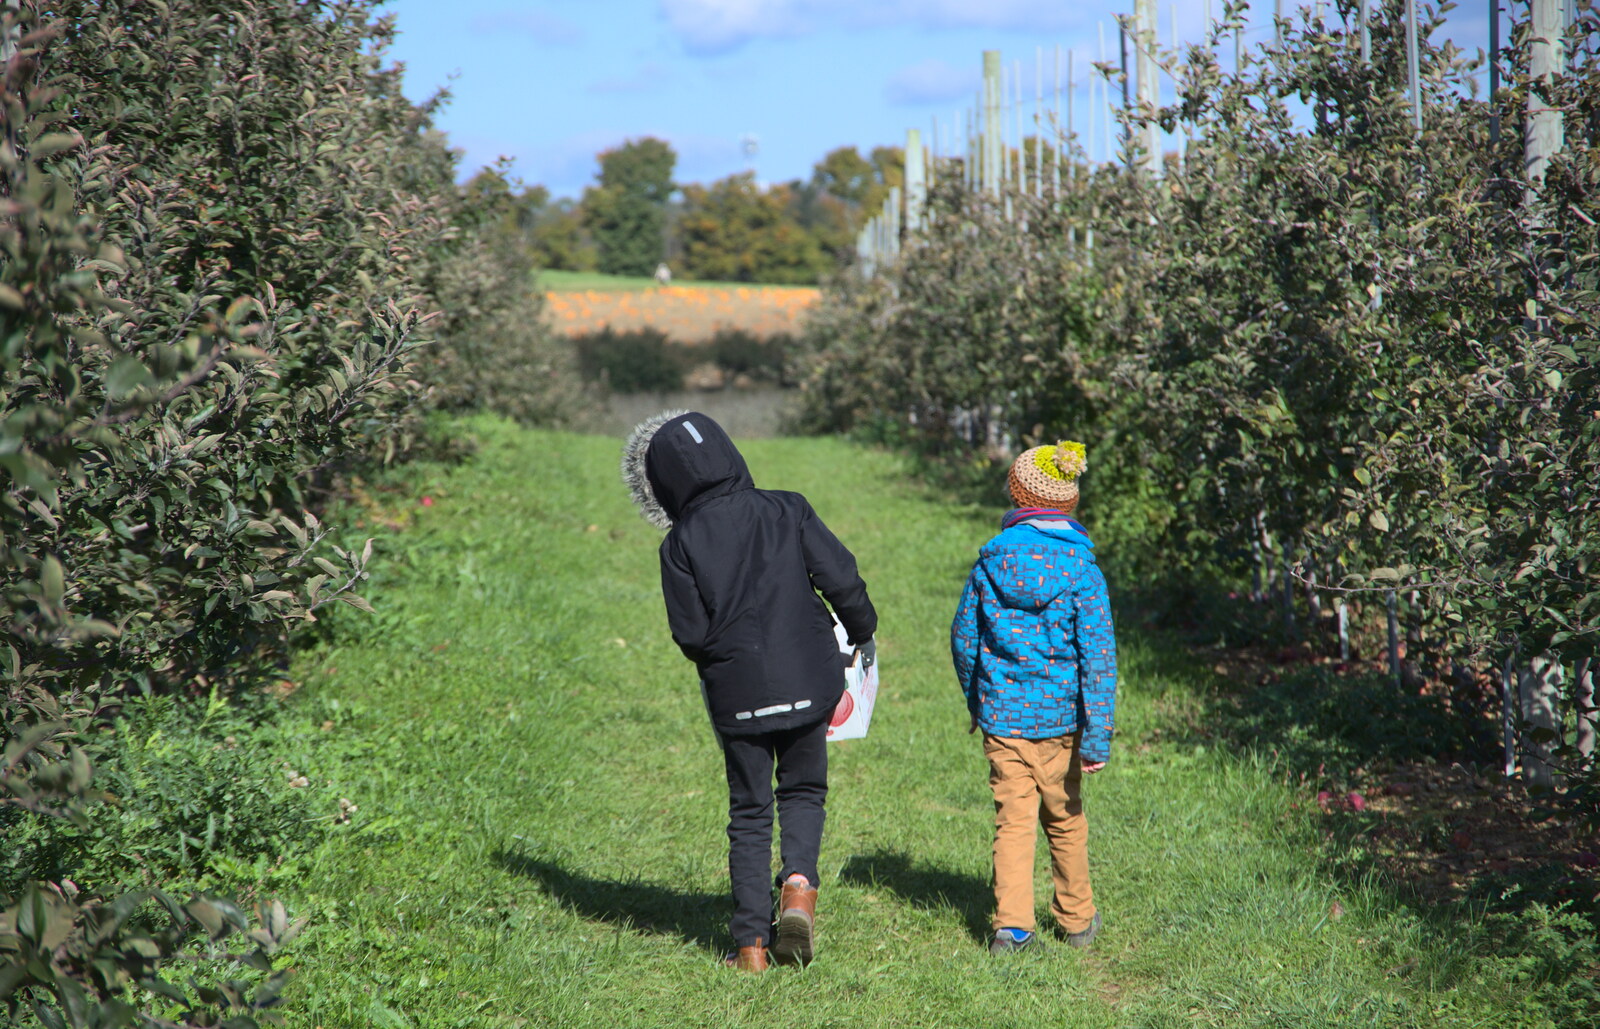 Fred and Harry look for more apples to pick from Pumpkin Picking at Alstede Farm, Chester, Morris County, New Jersey - 24th October 2018